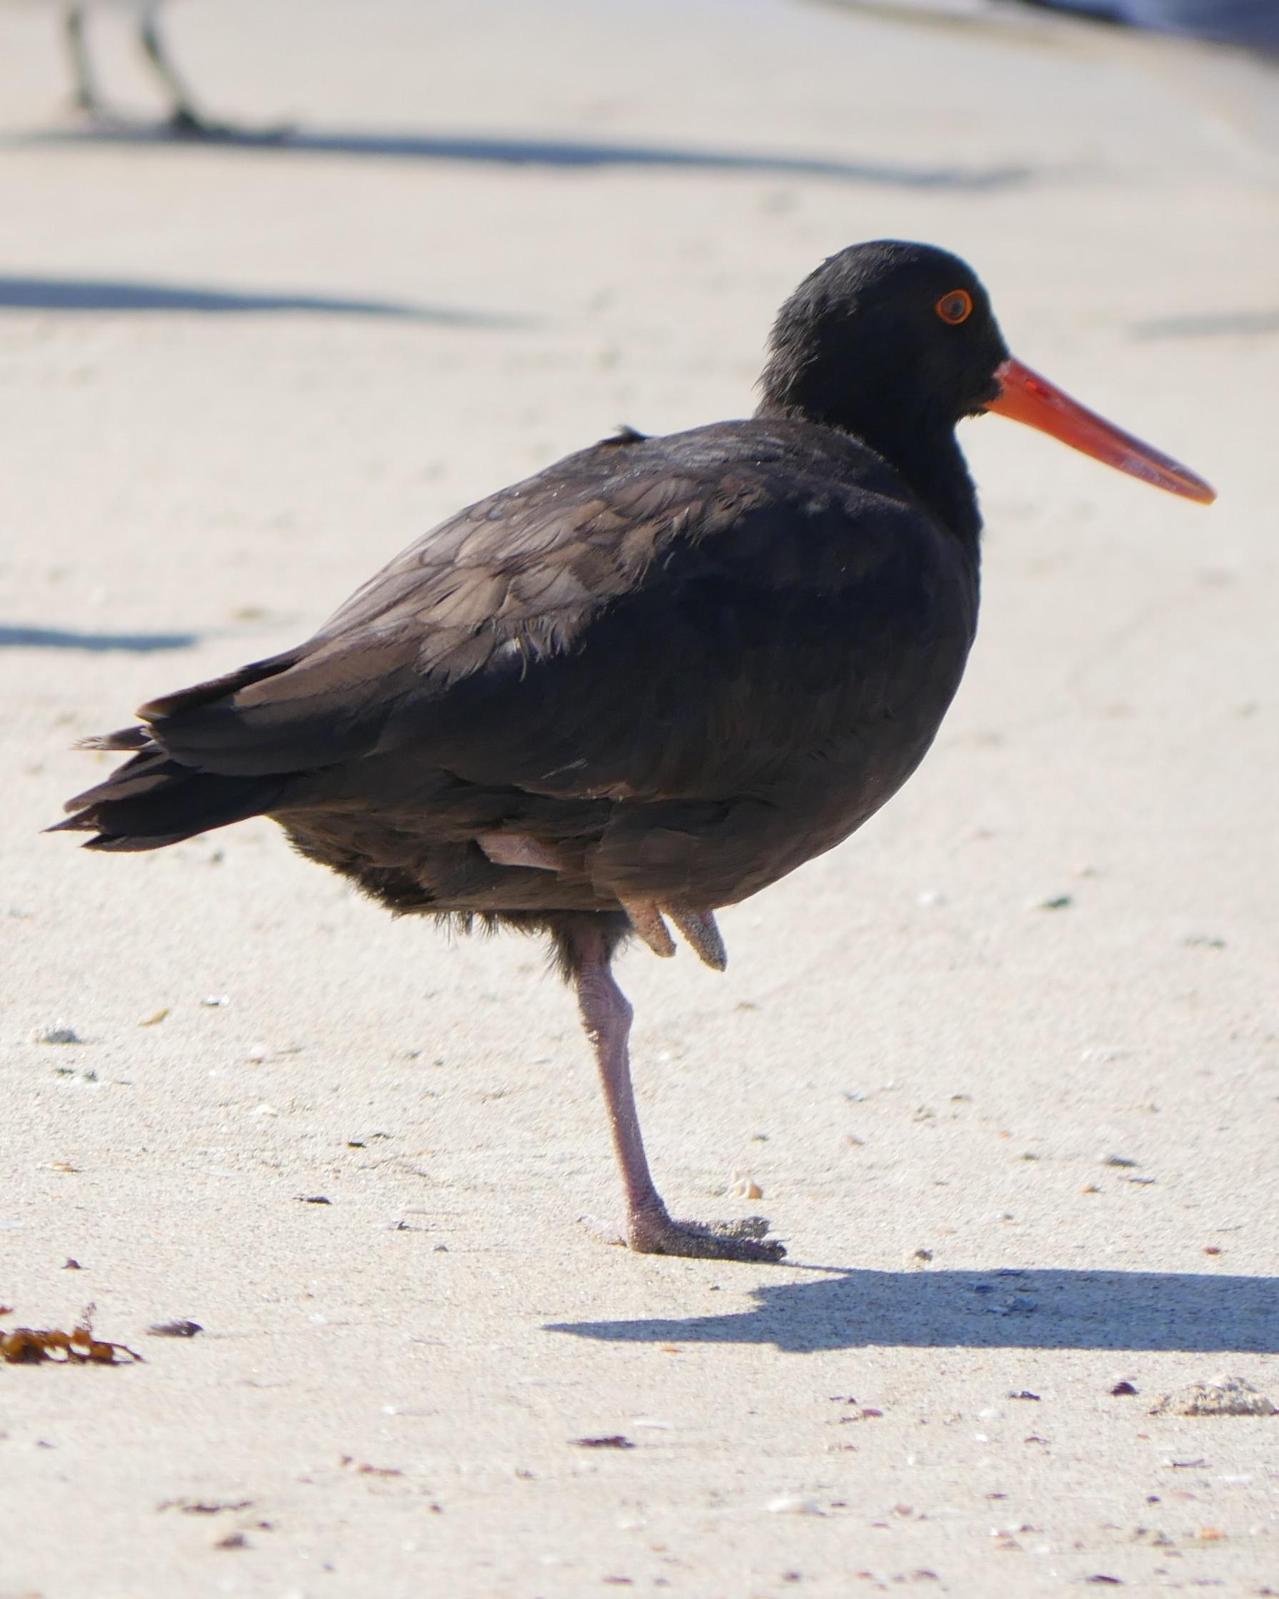 Sooty Oystercatcher Photo by Peter Lowe